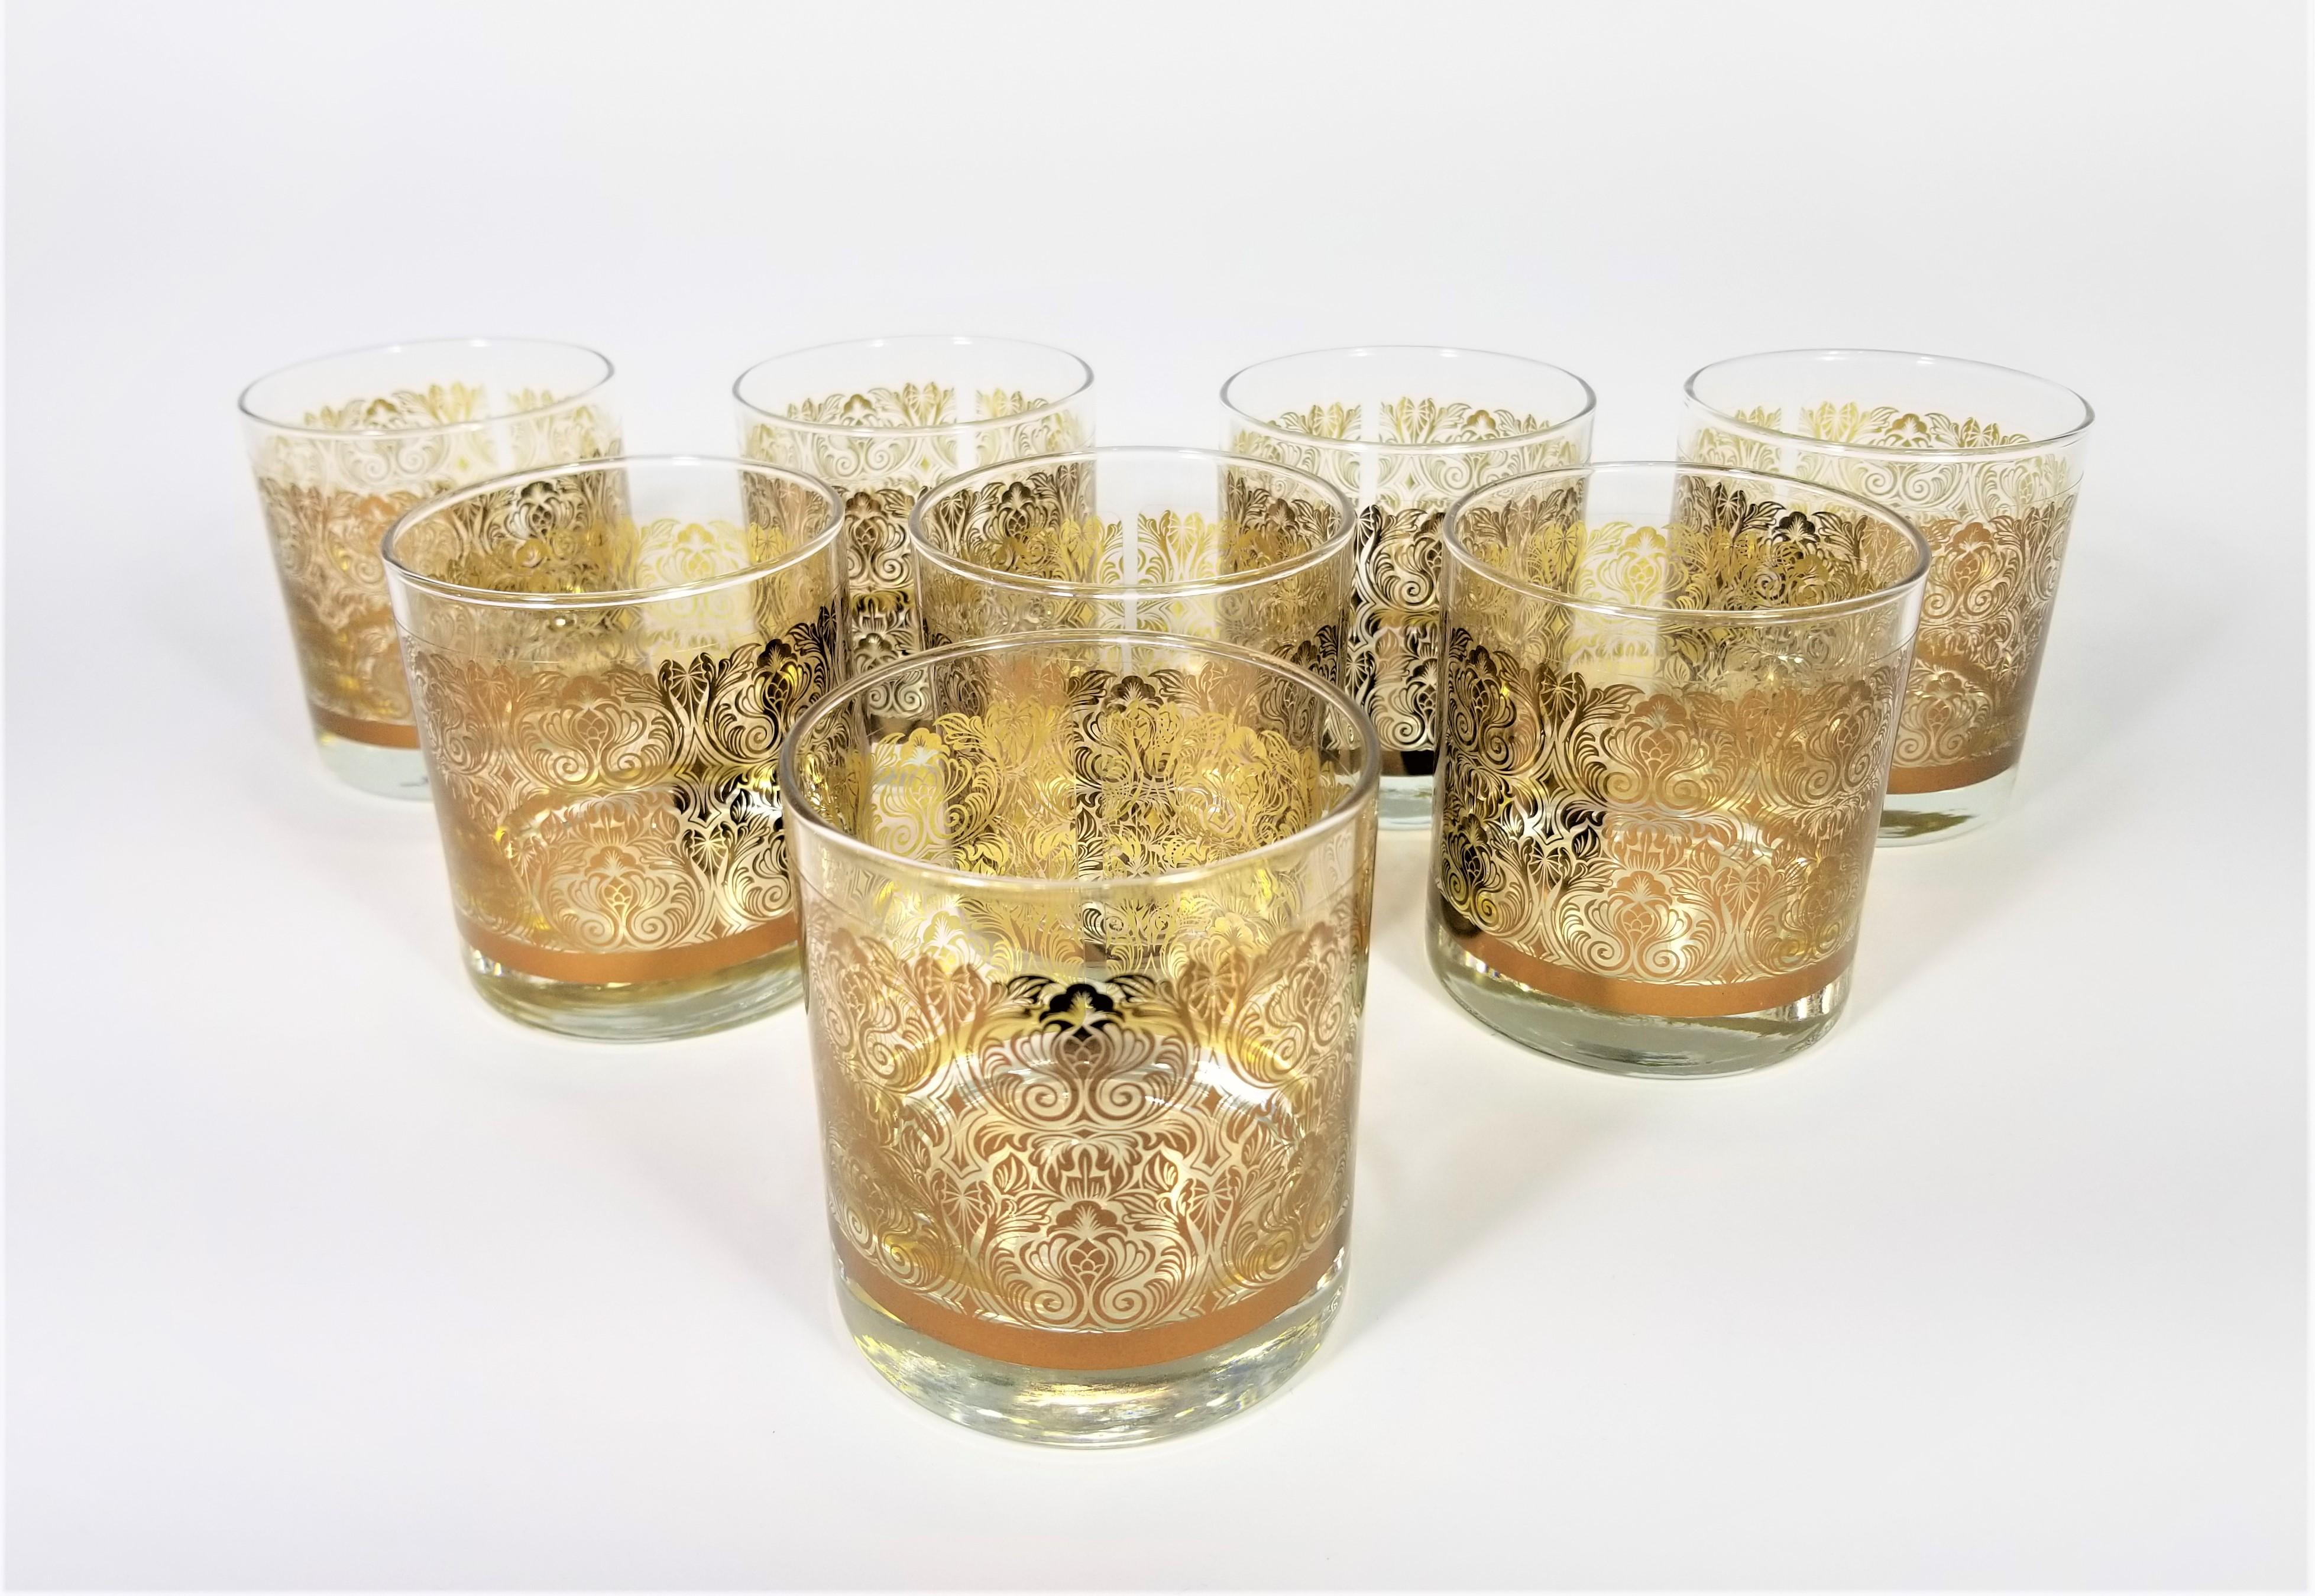 Midcentury Libbey signed glassware barware with gold filigree design. All glasses have Libbey marking on bottom. Petite rocks glasses. A perfect addition to any table, home bar or bar cart.